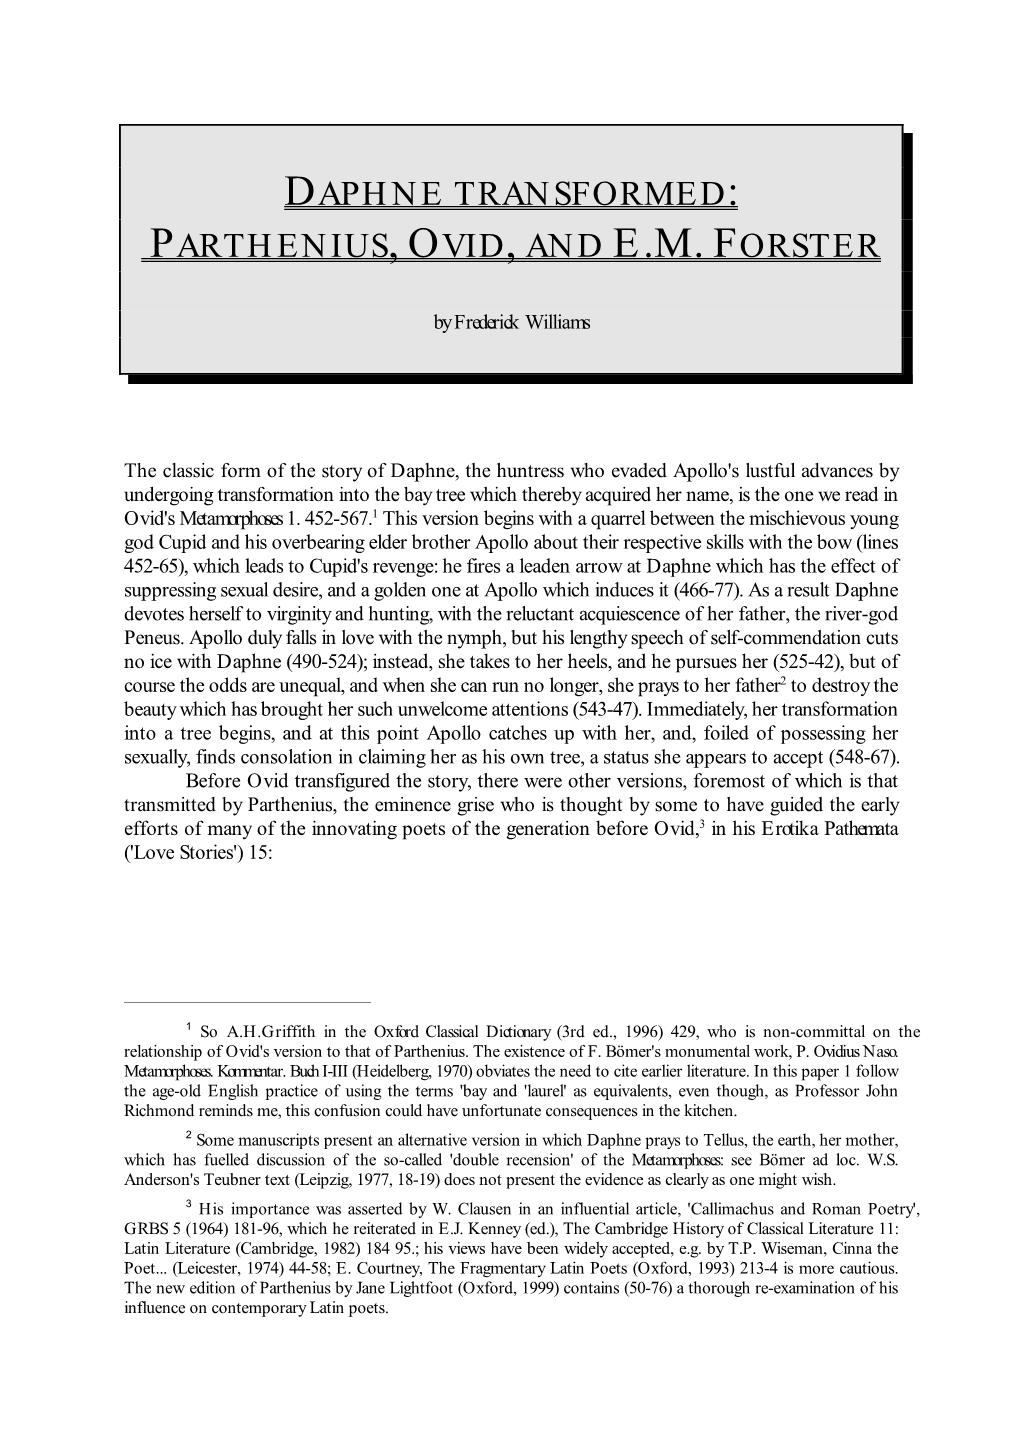 Daphne Transformed: Parthenius, Ovid, and E.M. Forster